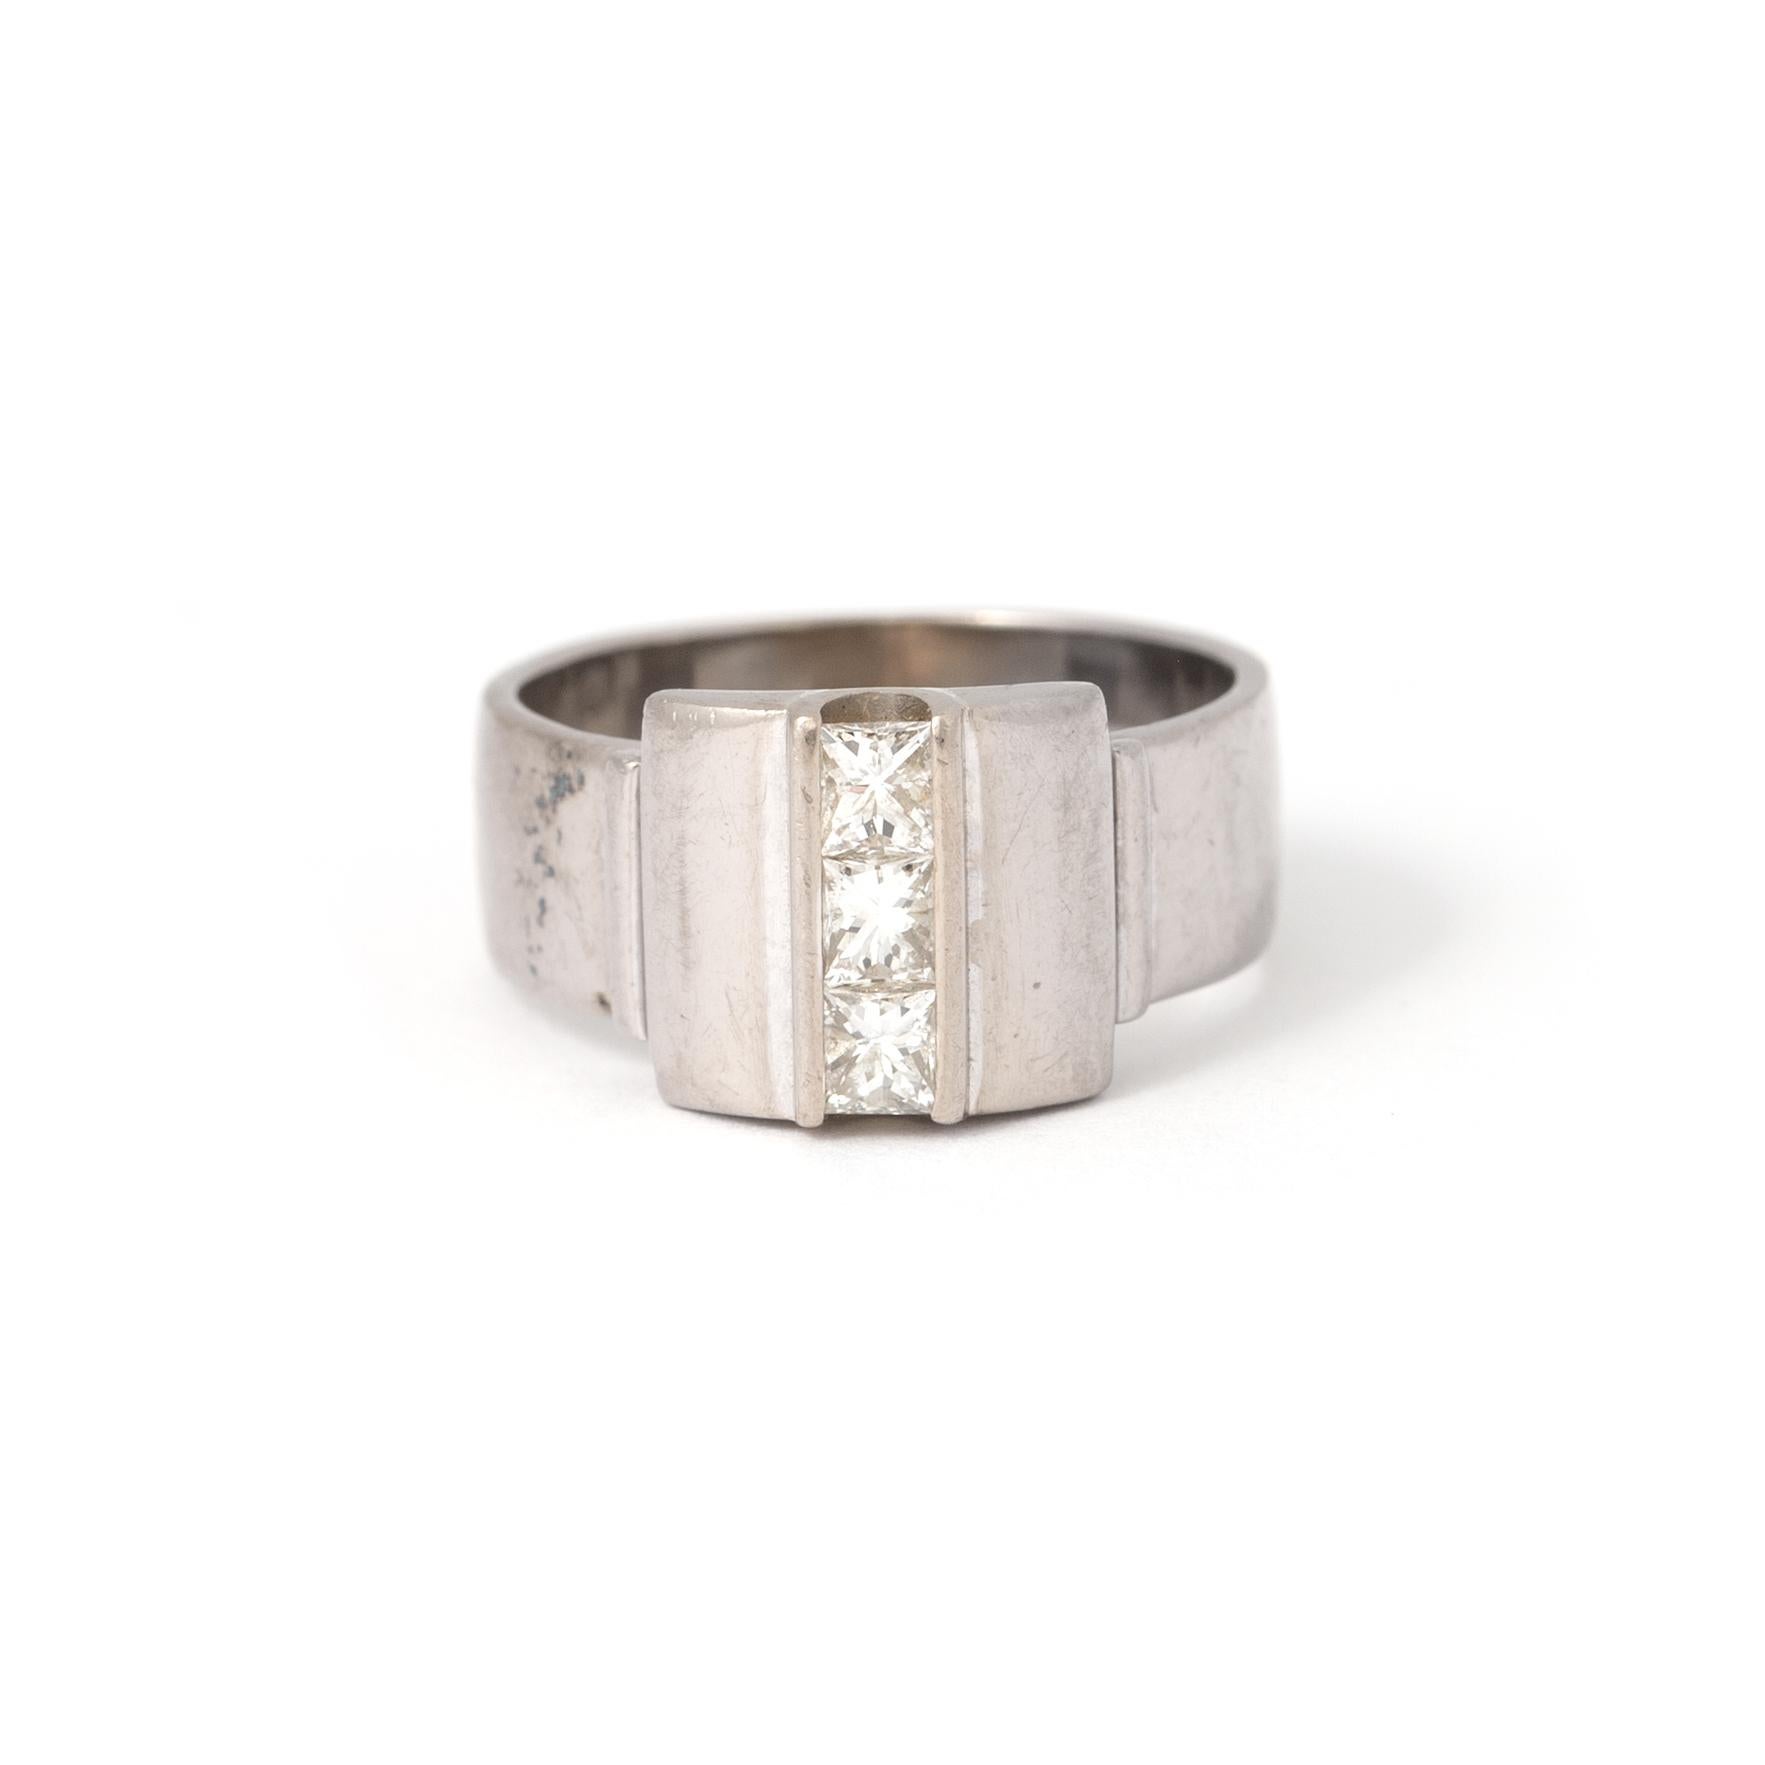 Otto Poulsen. 
18K white gold ring set with three princess cut diamonds. 
Signed Poulsen. 
Dimensions of the central motif: 8.97 x 9.78 x 3.97 mm. 
Size: 47.5. 
Gross weight: 7.83 grams.